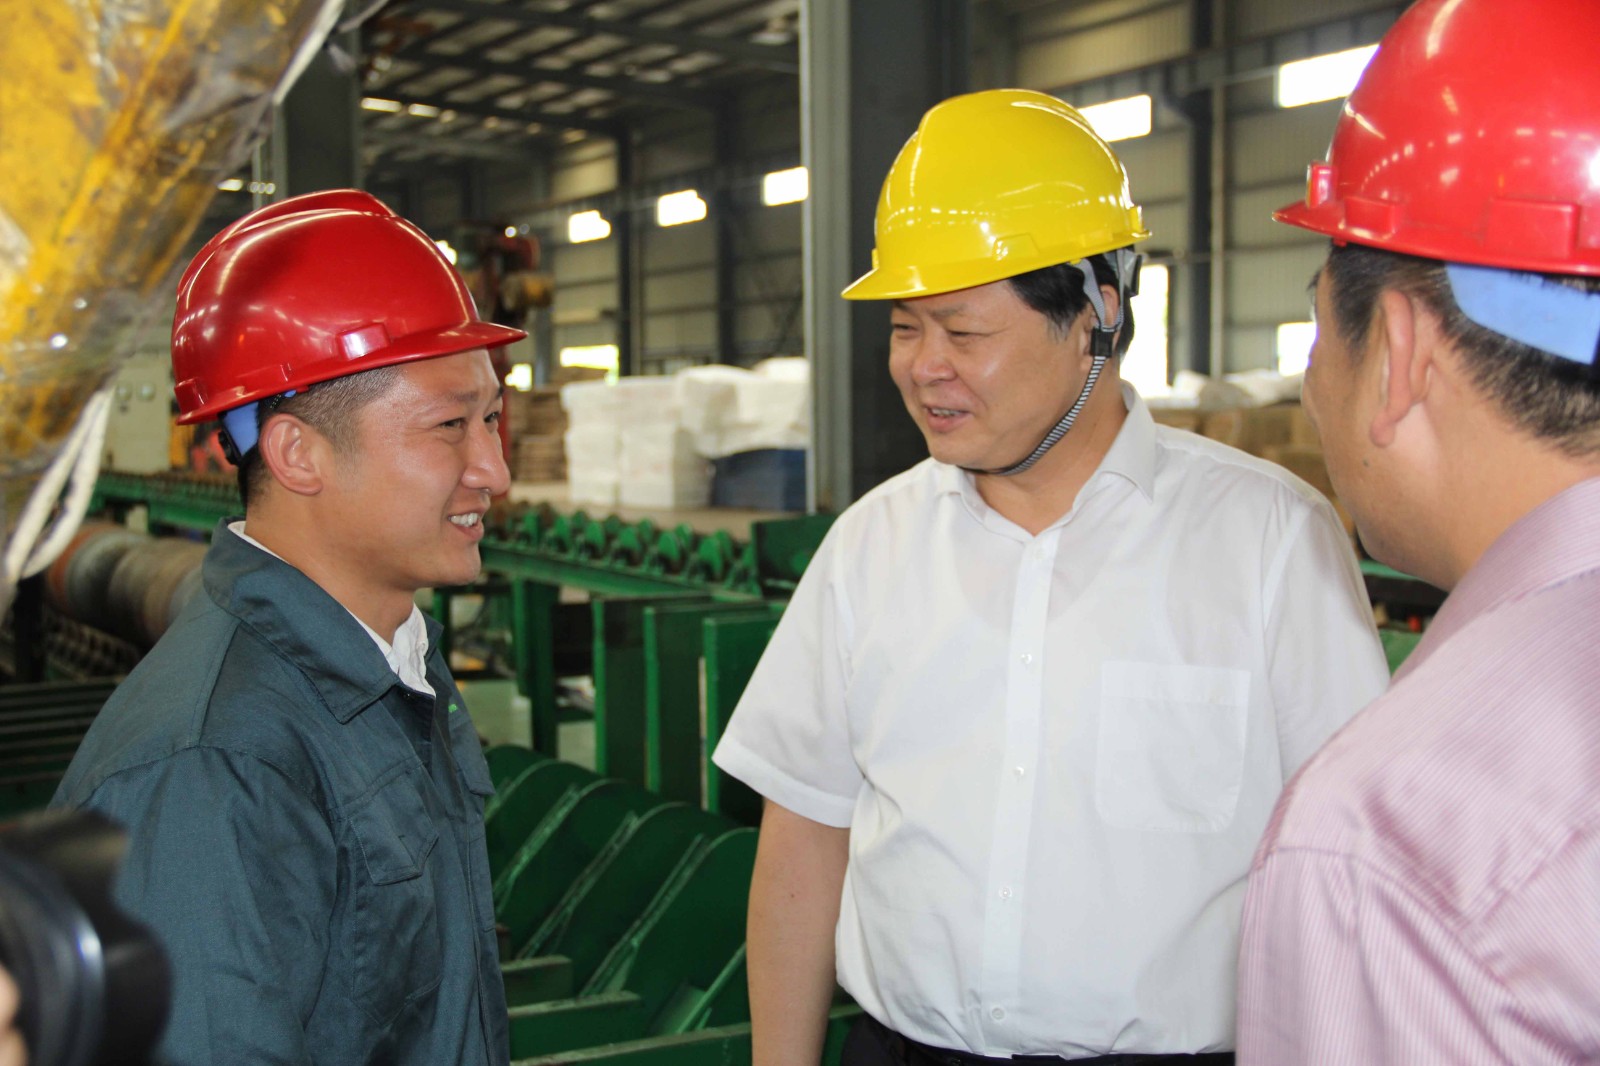 The deputy governor of Anhui Province and his delegation visited our company to inspect and guide the work